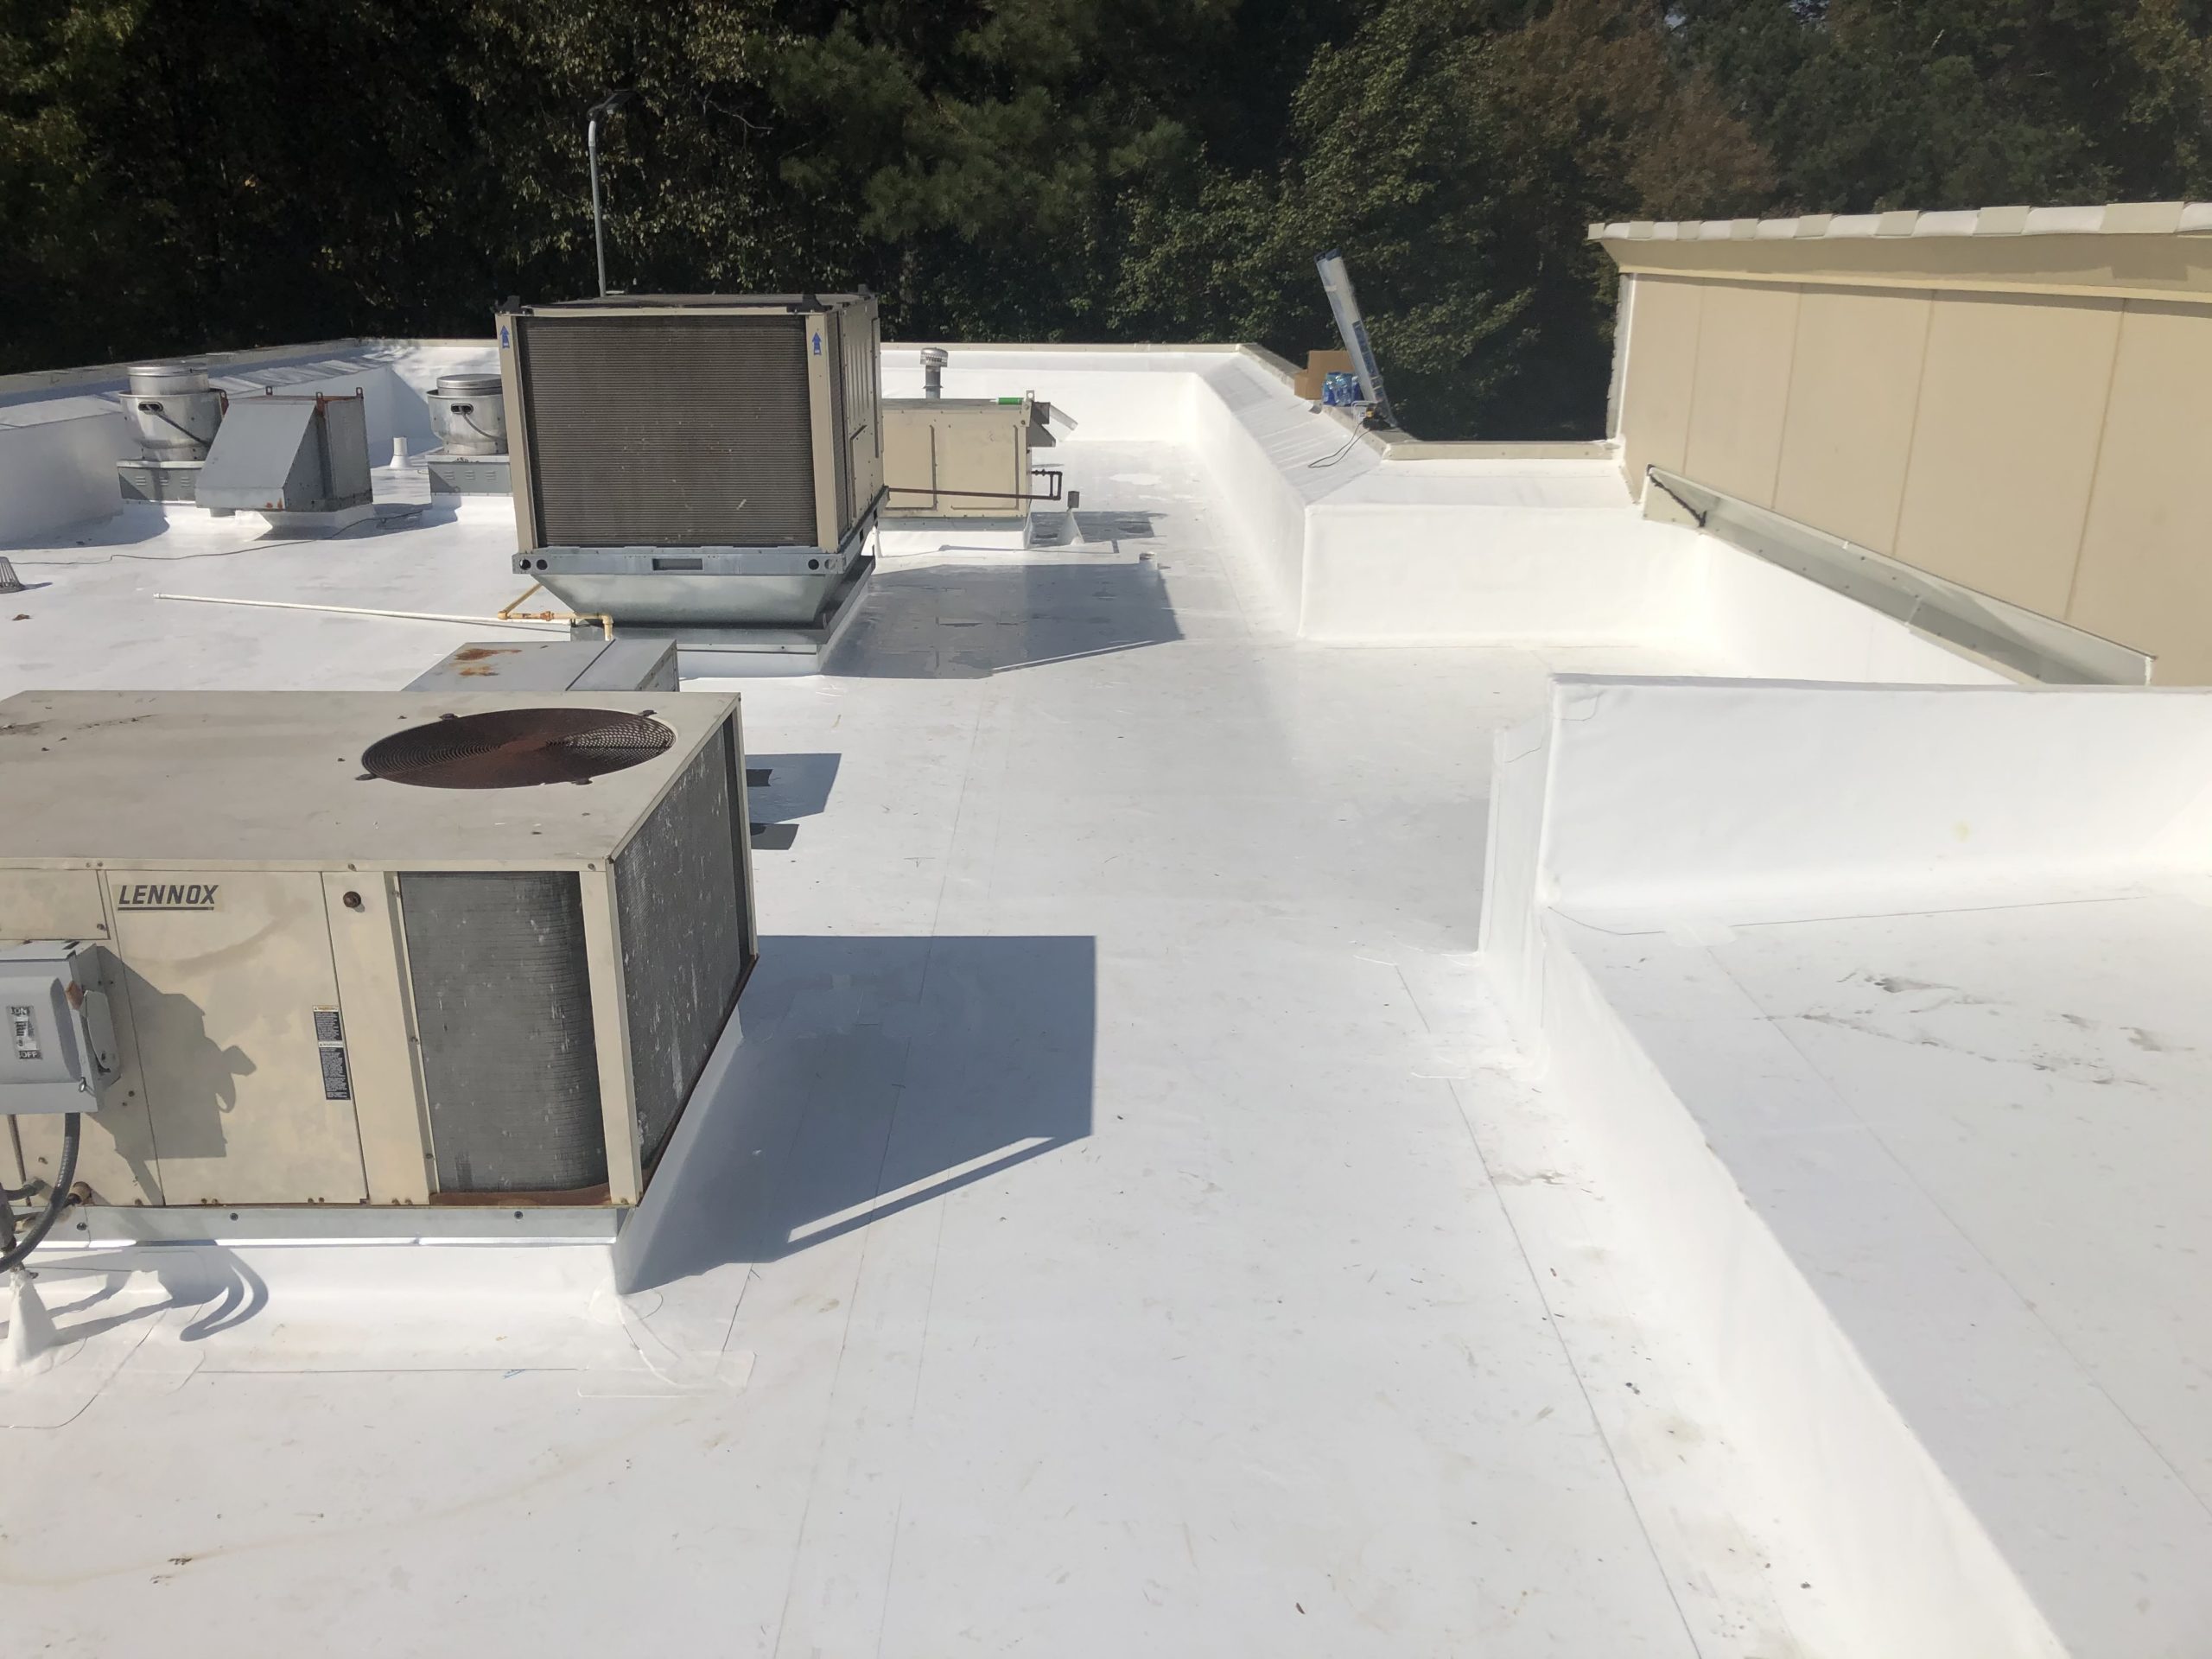 Epdm Roofing with HVAC units